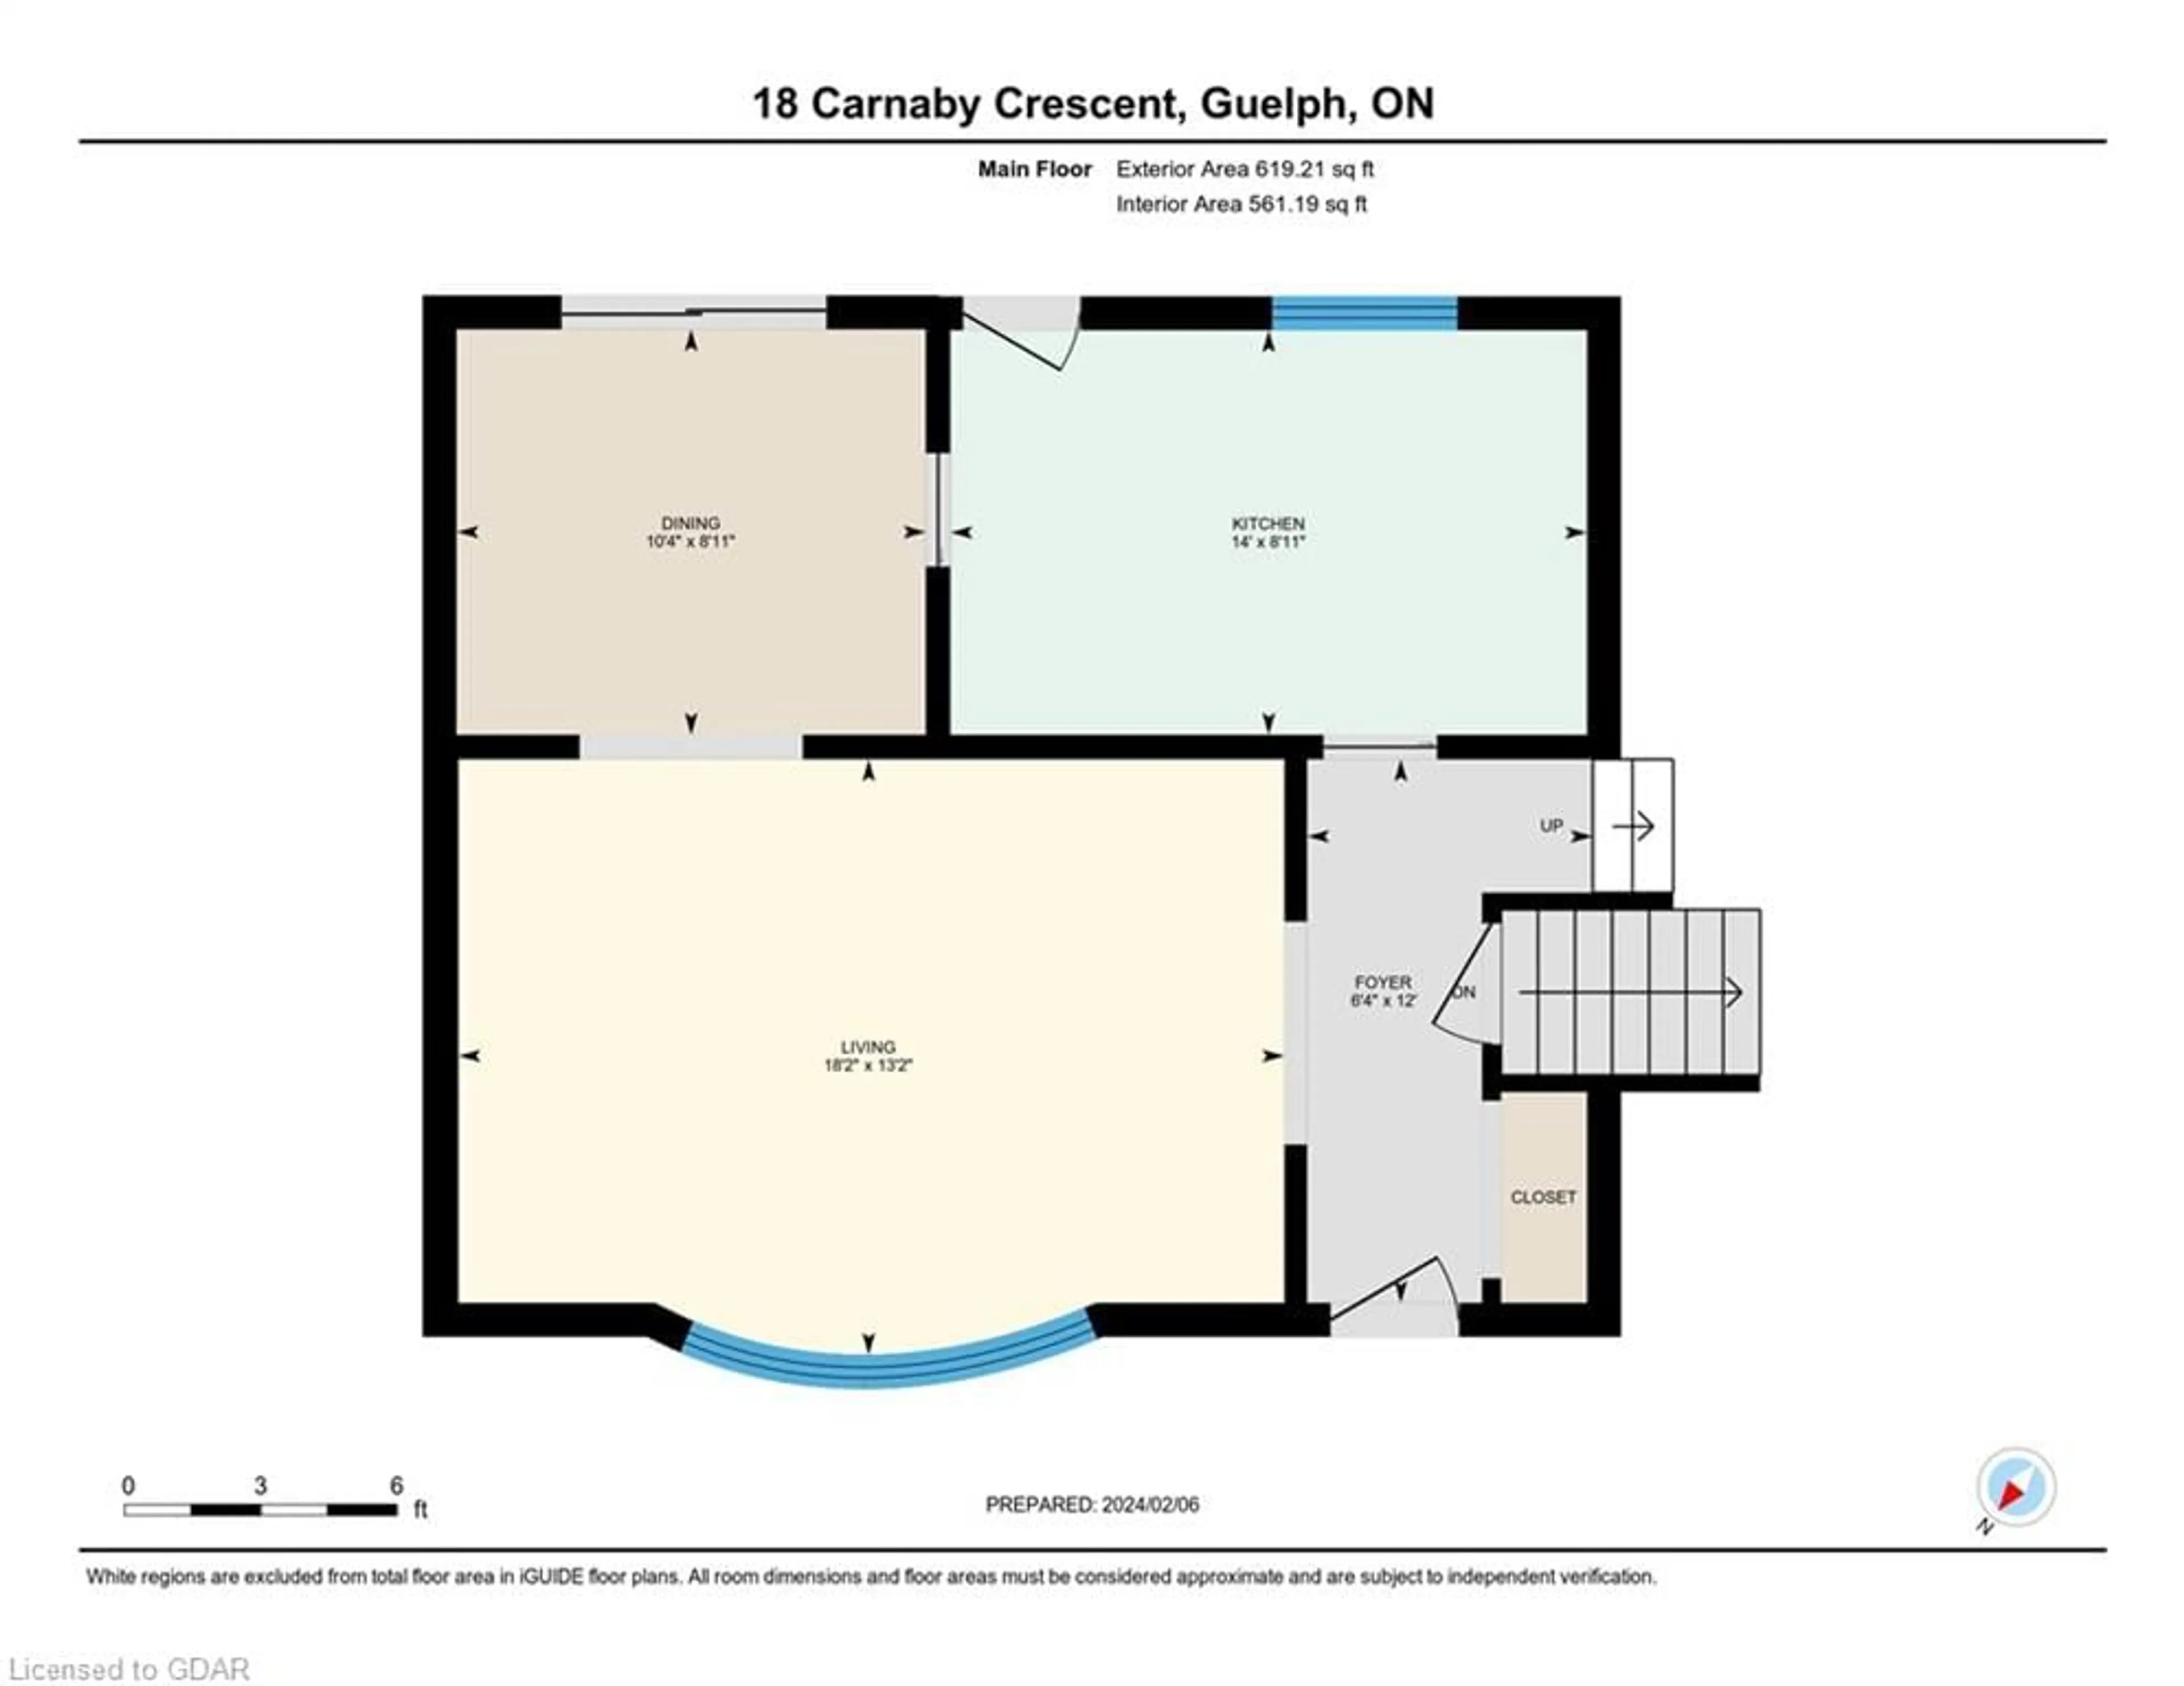 Floor plan for 18 Carnaby Cres, Guelph Ontario N2G 2R2